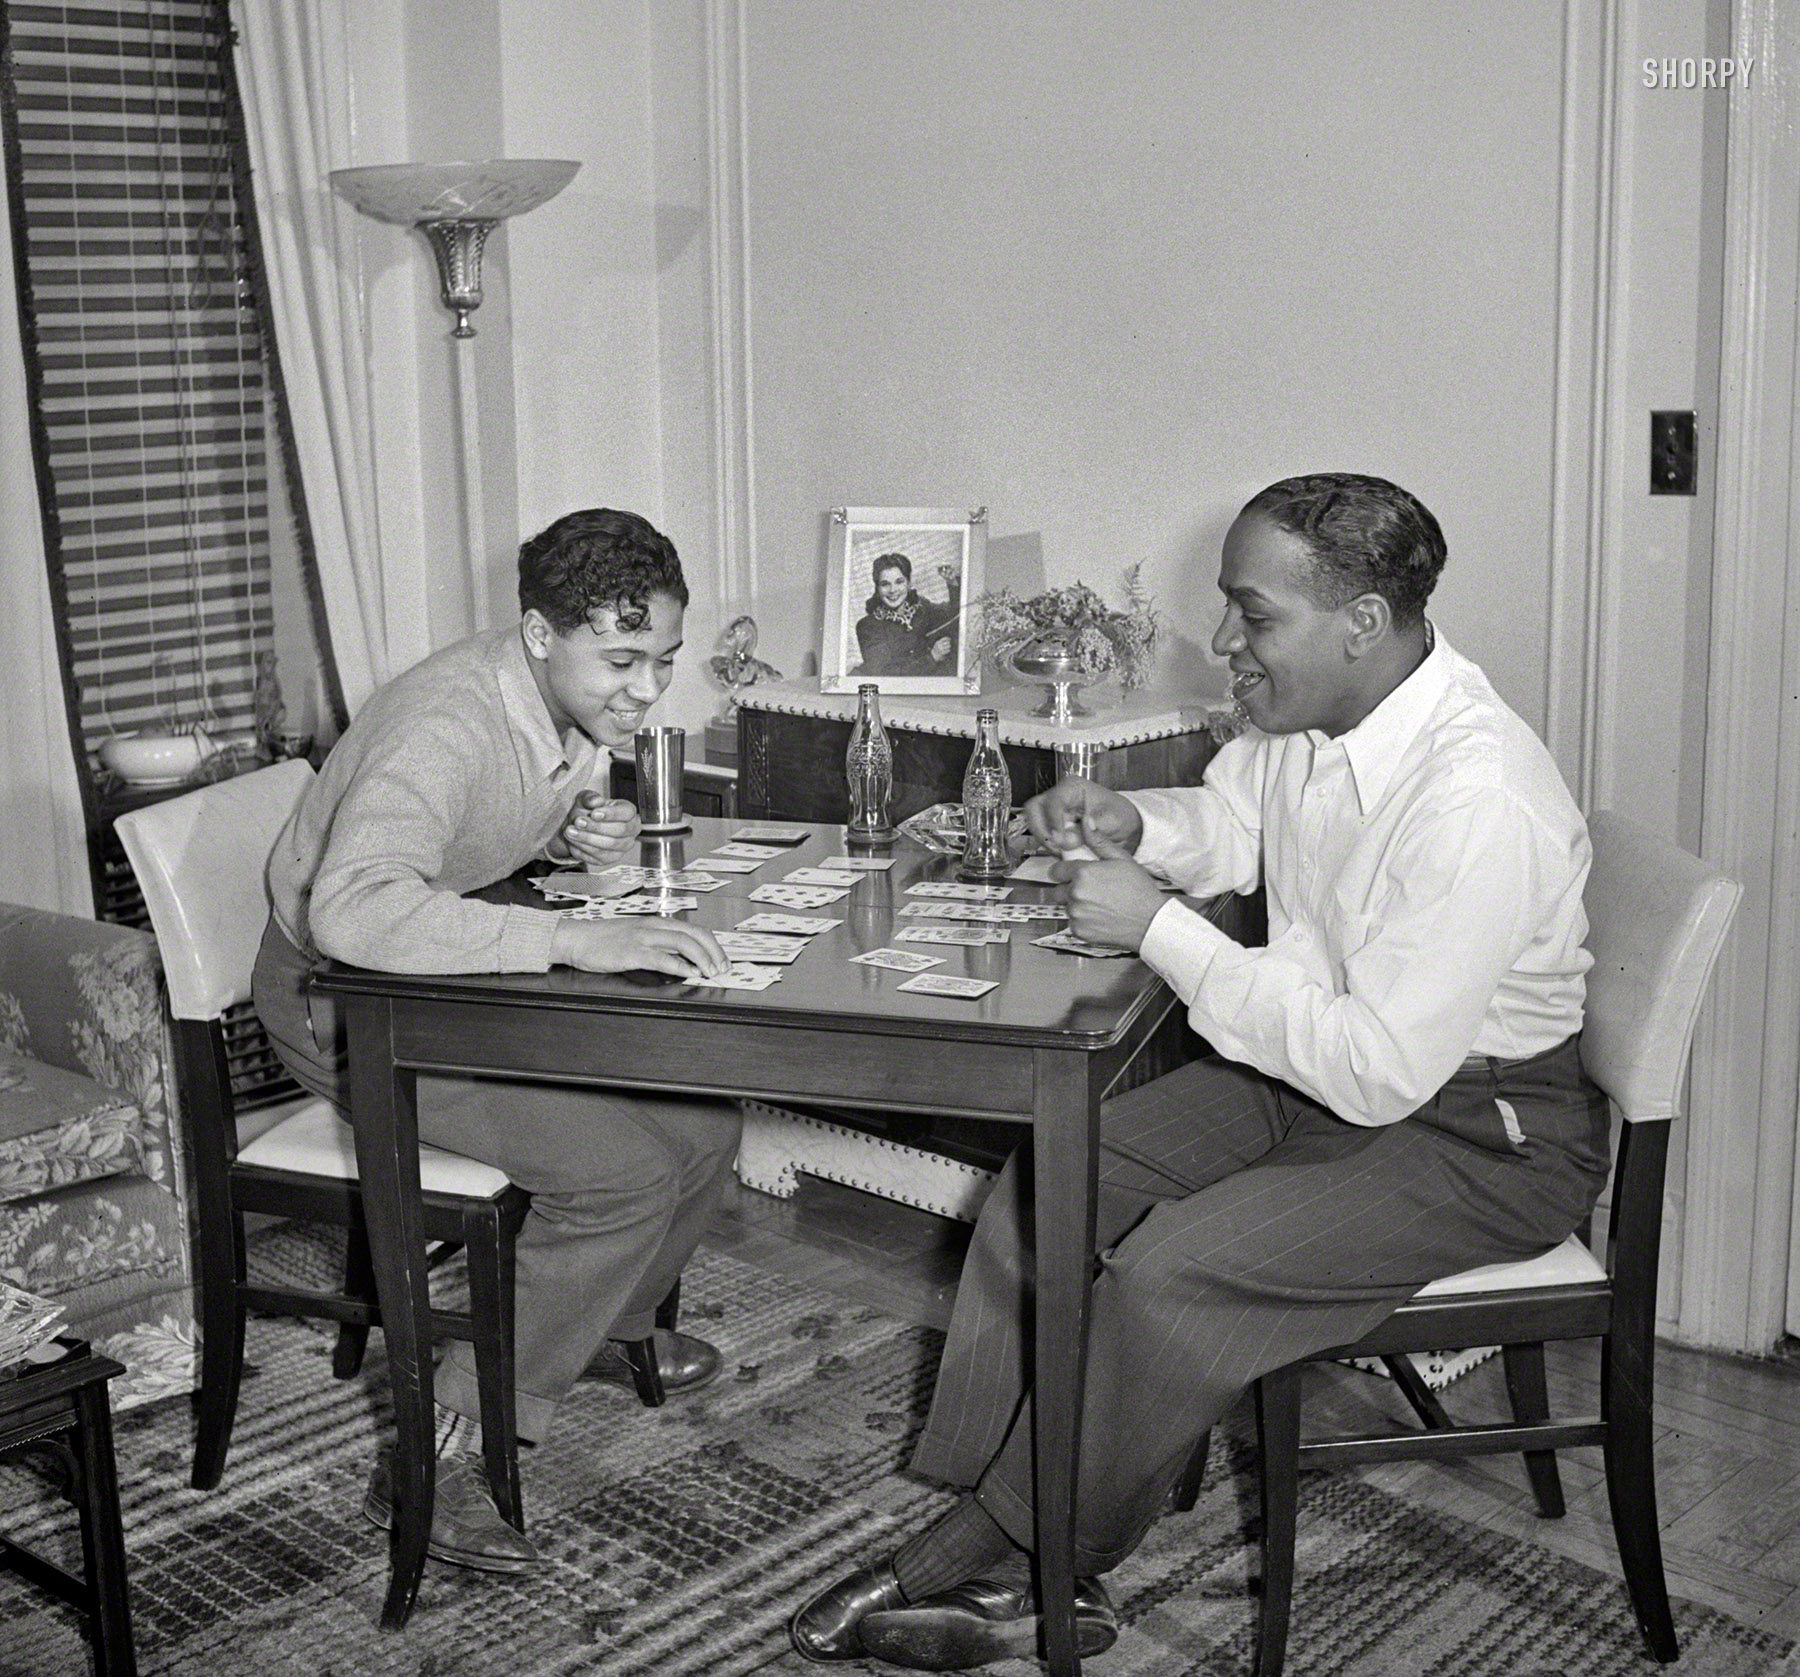 Another of Albert Fenn's uncaptioned New York photos from 1942, this one part of a series of pictures showing the violinist and bandleader Eddie South with his family at home. A very tidy home -- note that even the Coke bottles have coasters. Office of War Information archive negative. View full size.